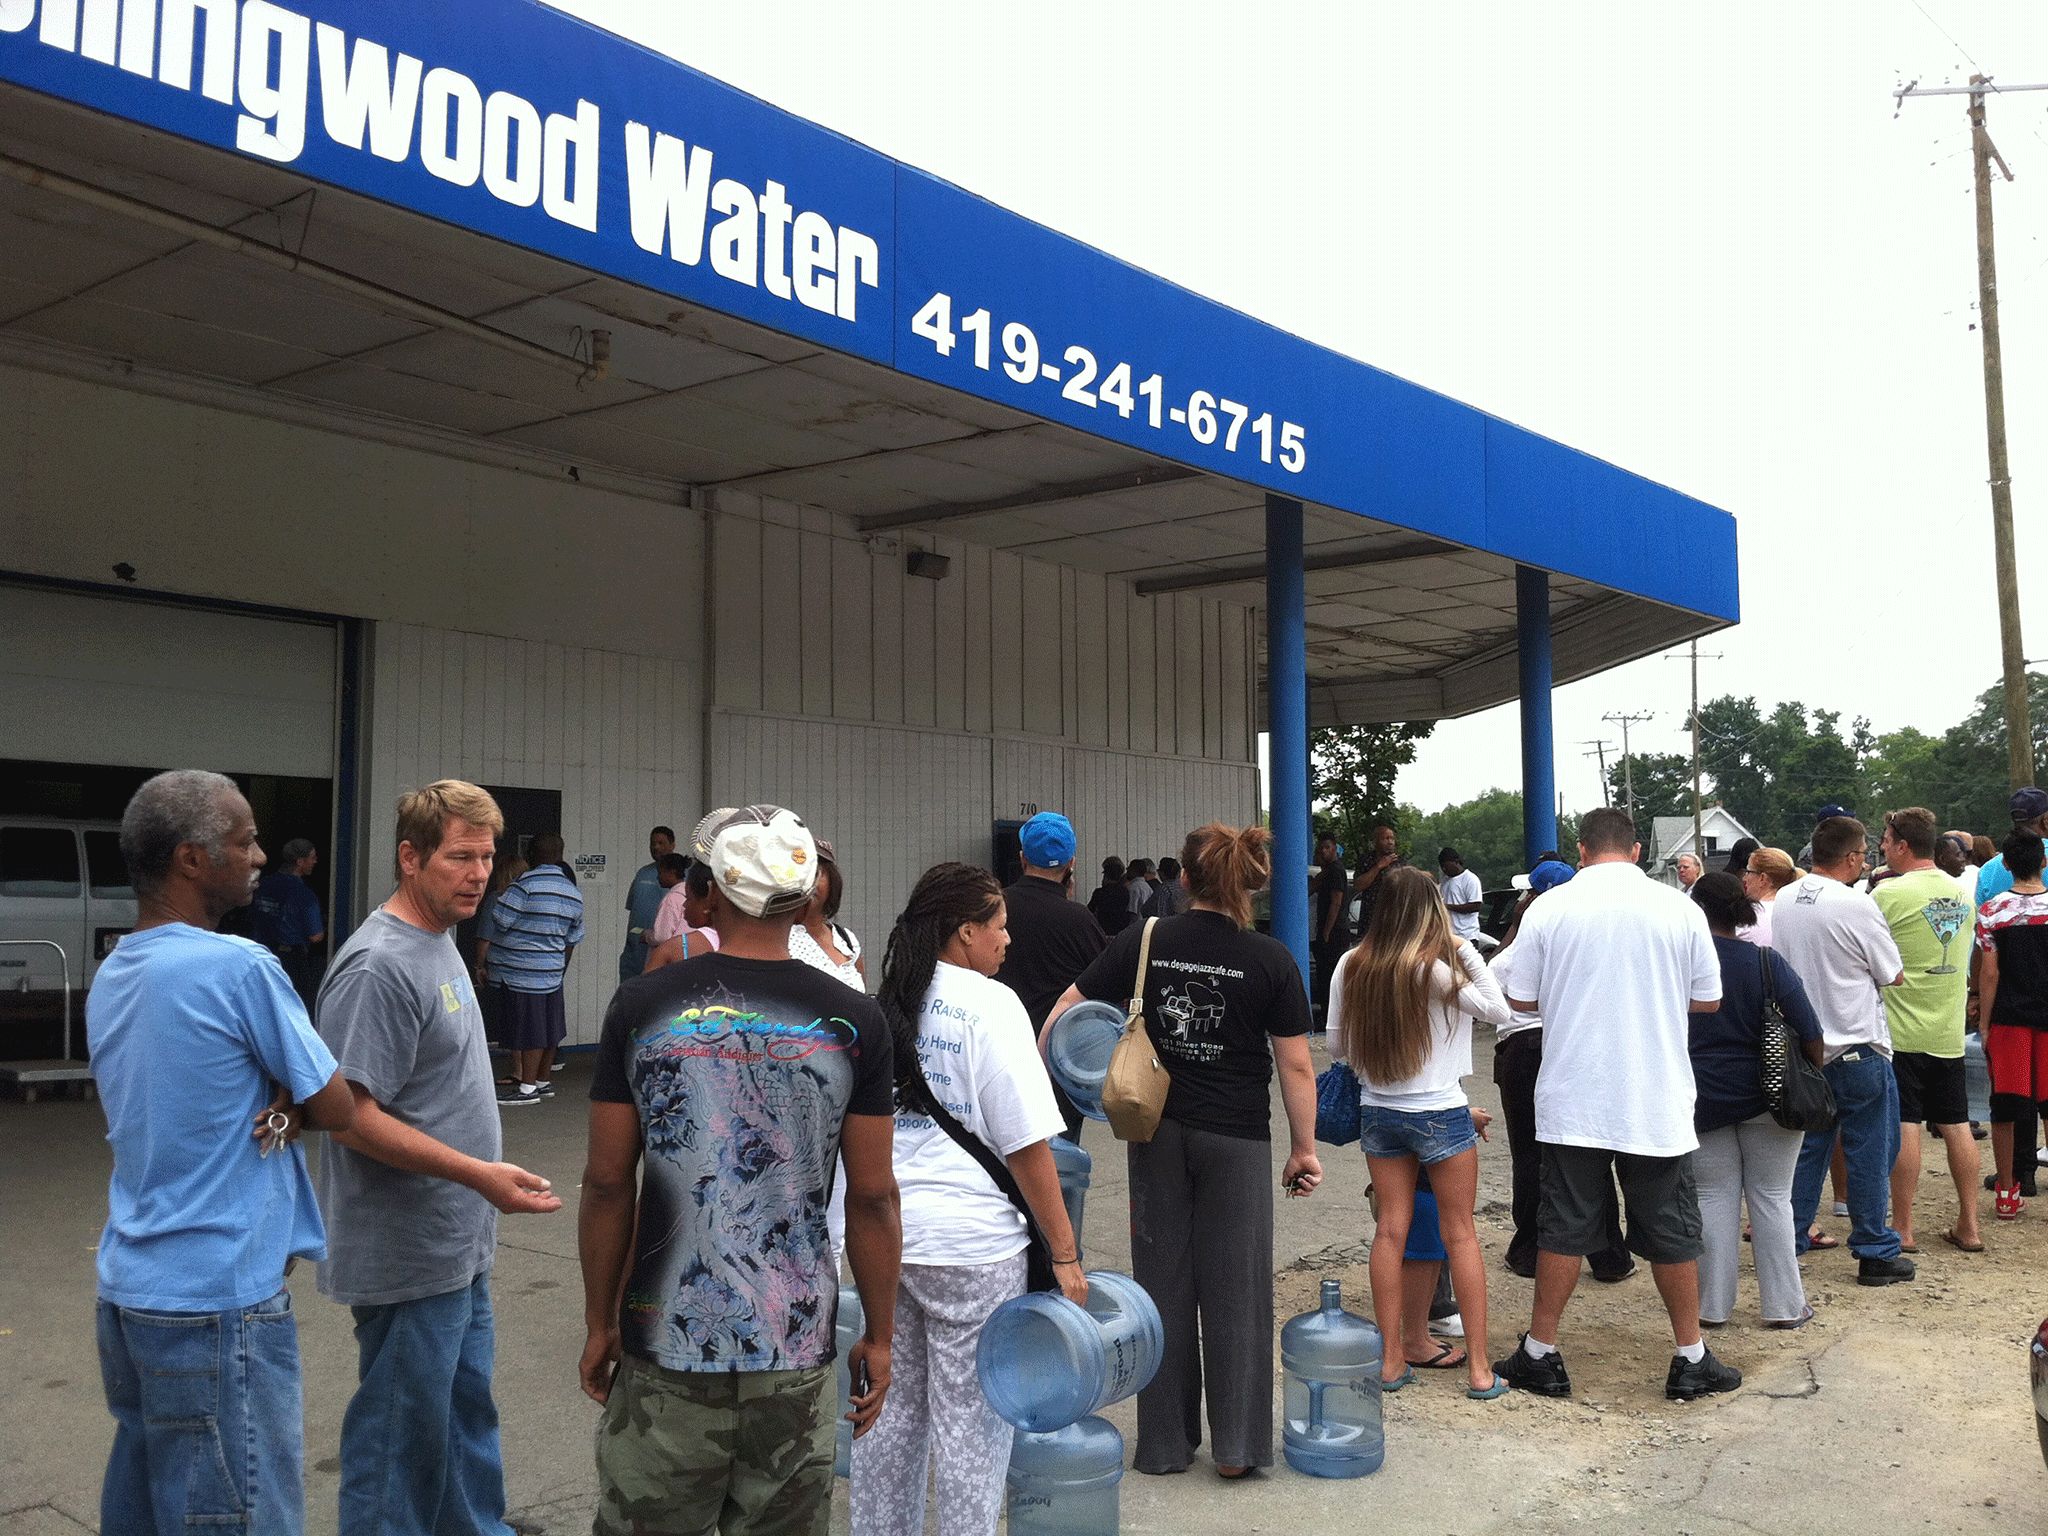 Residents in Toledo line up for water on Saturday, August 2, after a state of emergency was declared in northwest Ohio